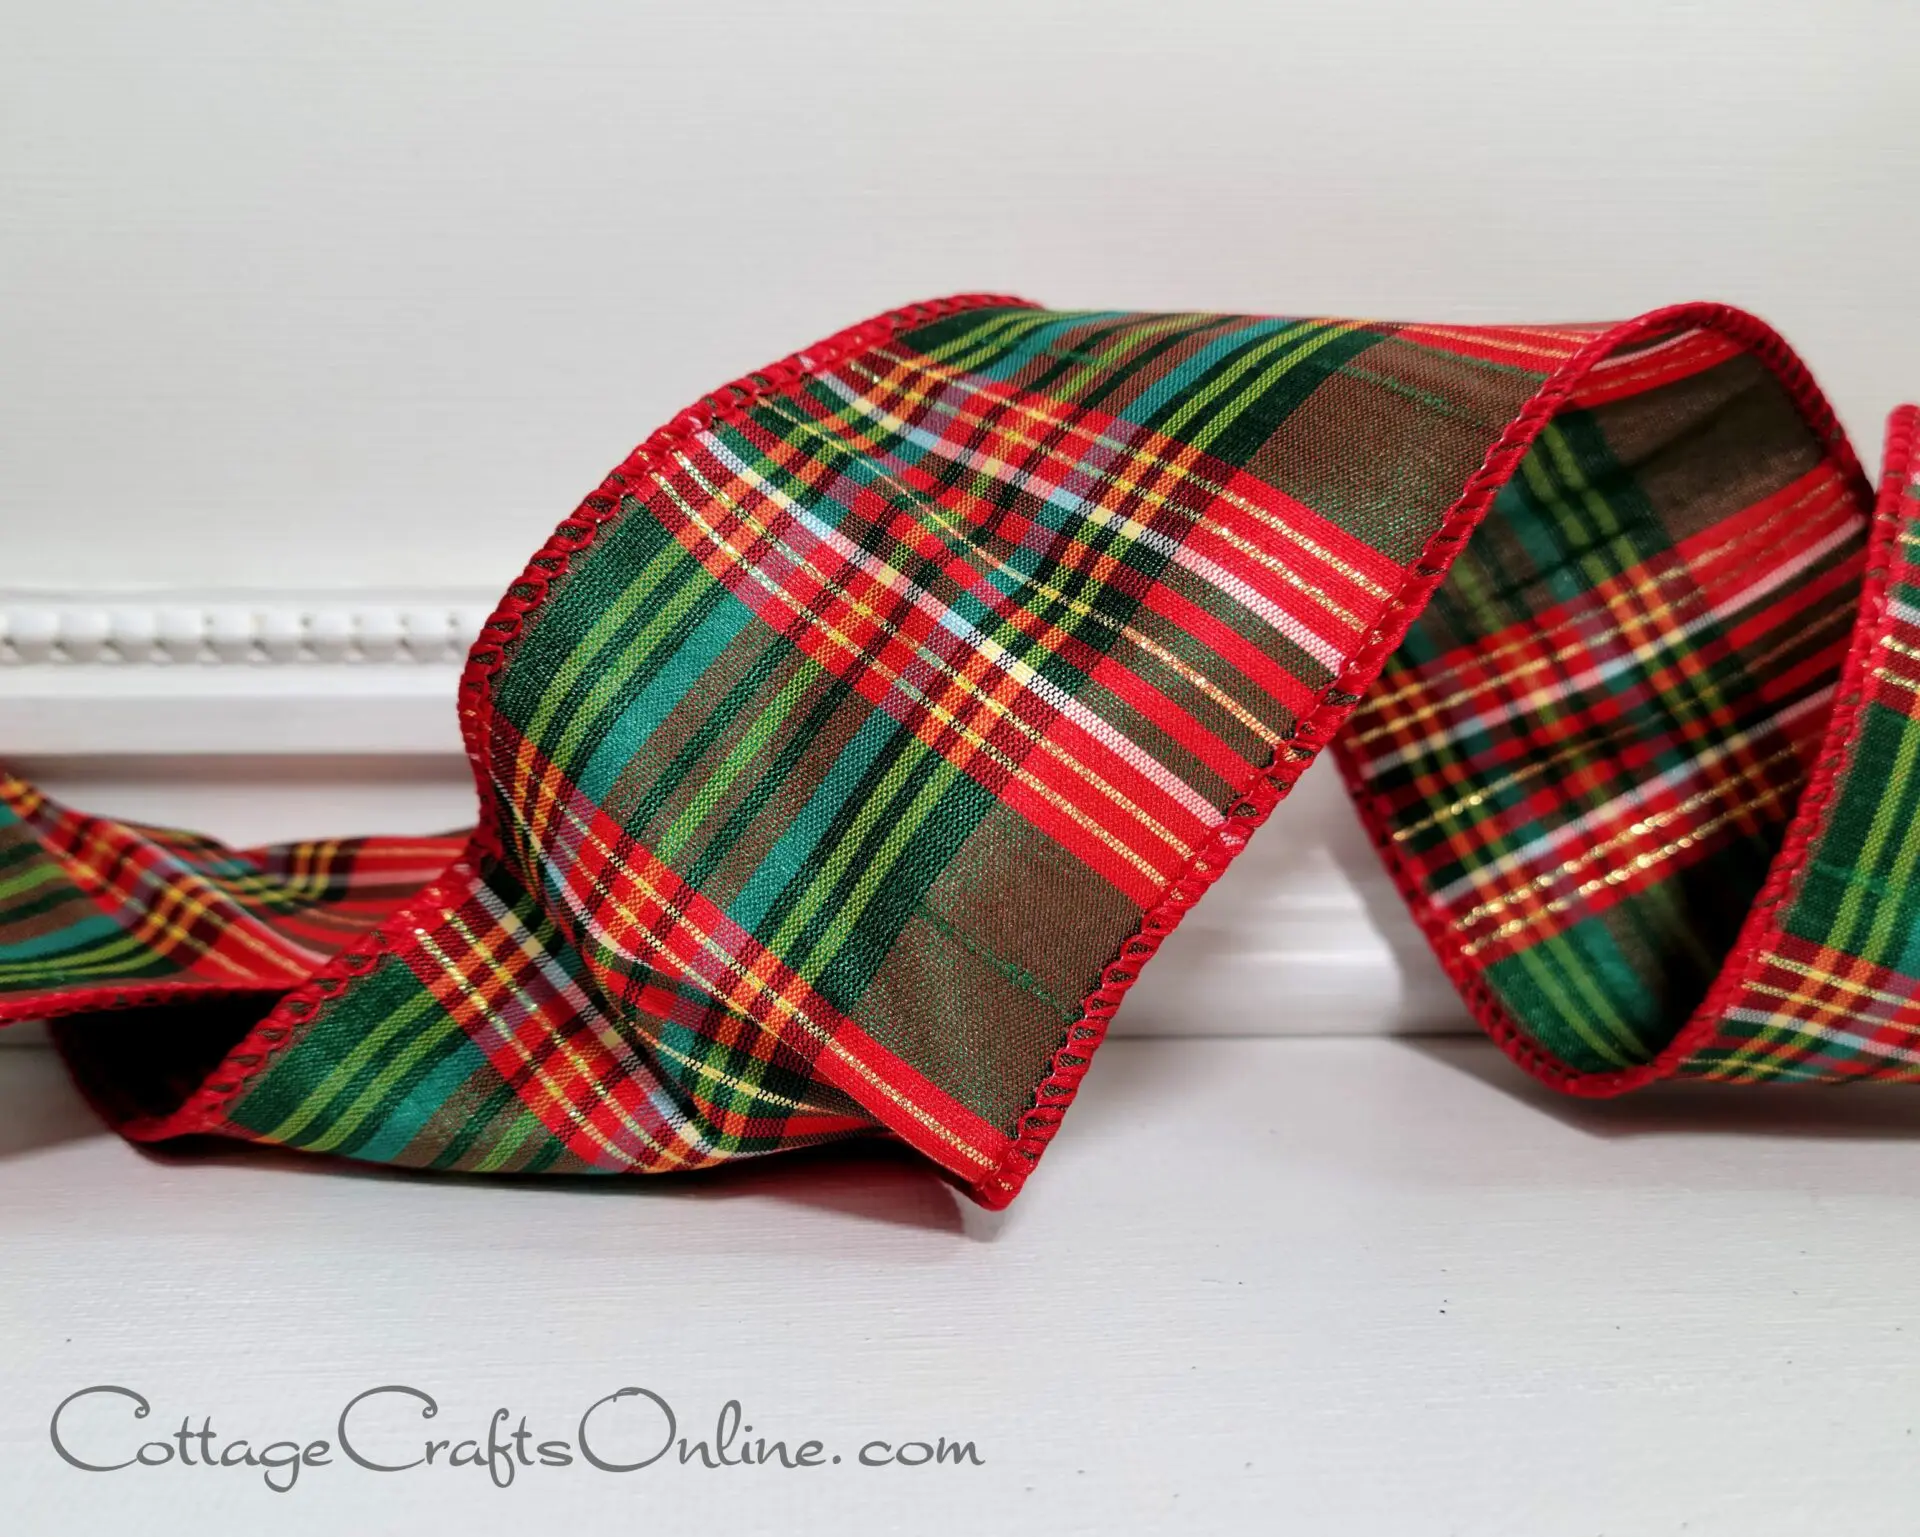 A new fall ribbon with a red and green plaid pattern is displayed on a white shelf.